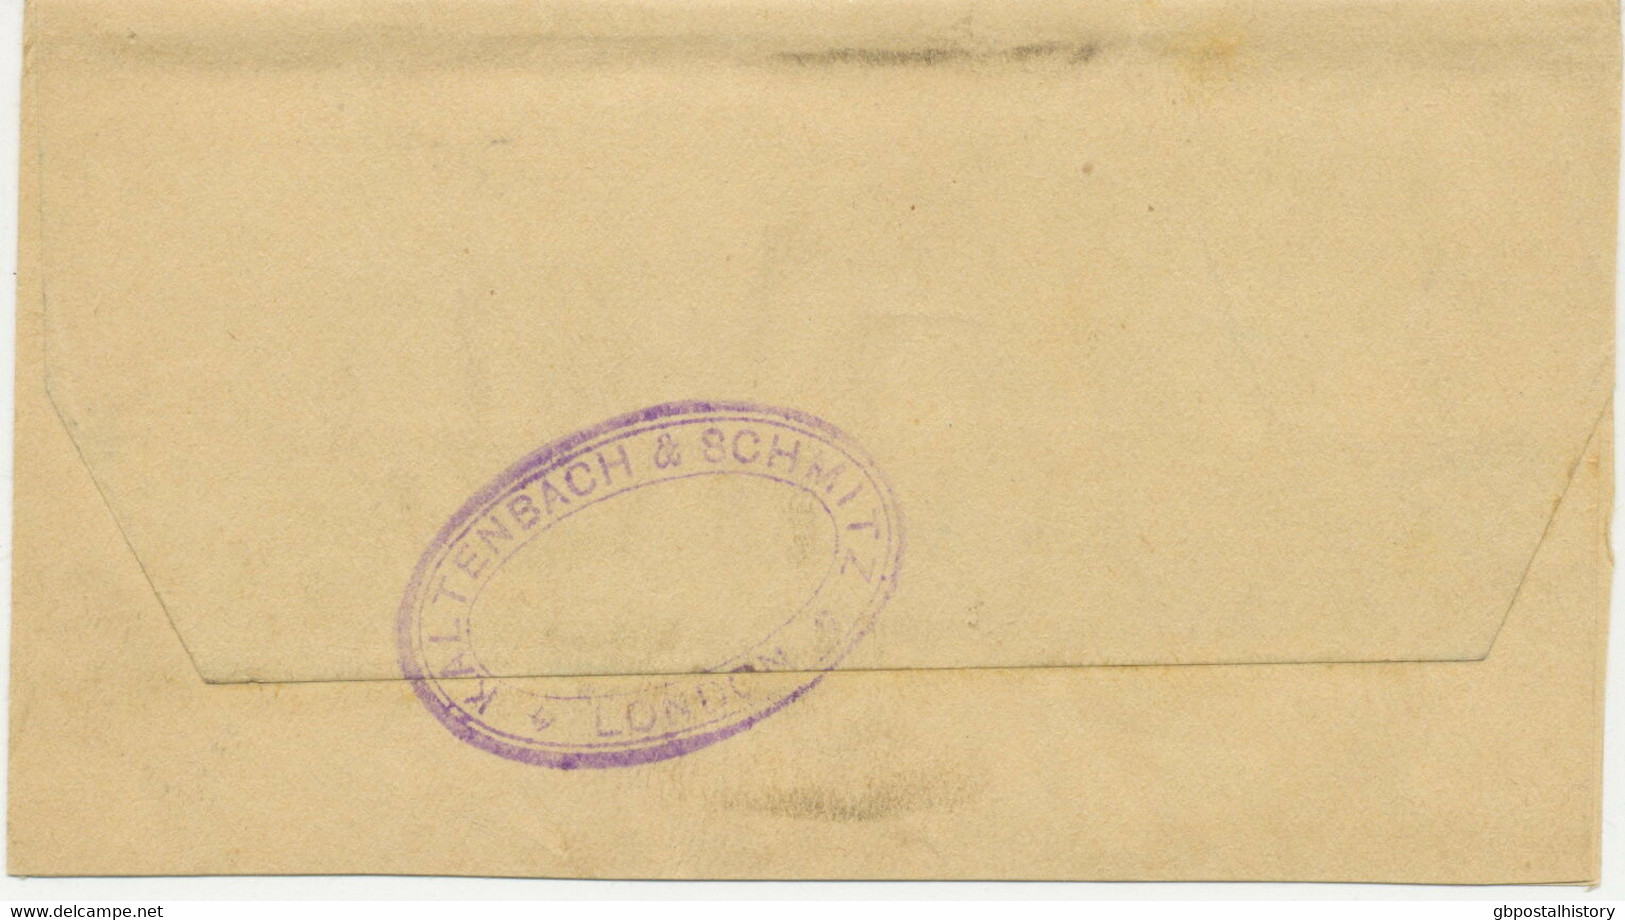 GB 189? QV 1/2 D Wrapper Uprated W 1/2 D Jubilee From LONDON "FB" To SINGAPORE - Covers & Documents